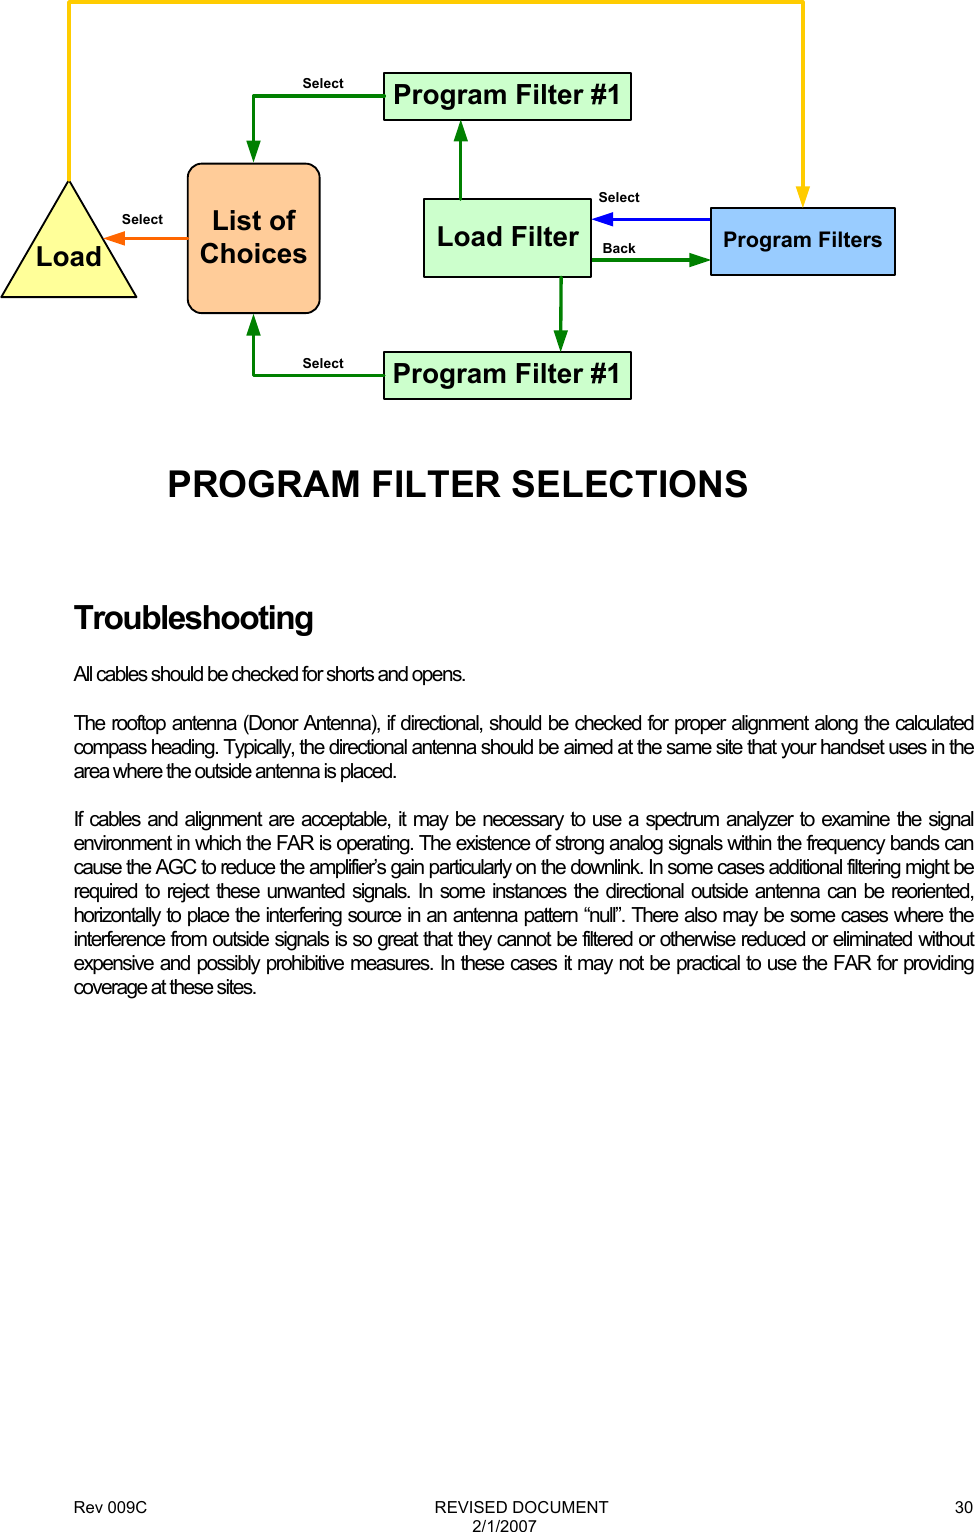 Rev 009C                                                              REVISED DOCUMENT 2/1/2007 30PROGRAM FILTER SELECTIONSLoad FilterSelectBack Program FiltersProgram Filter #1Program Filter #1List of ChoicesLoadSelectSelectSelect  Troubleshooting All cables should be checked for shorts and opens. The rooftop antenna (Donor Antenna), if directional, should be checked for proper alignment along the calculated compass heading. Typically, the directional antenna should be aimed at the same site that your handset uses in the area where the outside antenna is placed. If cables and alignment are acceptable, it may be necessary to use a spectrum analyzer to examine the signal environment in which the FAR is operating. The existence of strong analog signals within the frequency bands can cause the AGC to reduce the amplifier’s gain particularly on the downlink. In some cases additional filtering might be required to reject these unwanted signals. In some instances the directional outside antenna can be reoriented, horizontally to place the interfering source in an antenna pattern “null”. There also may be some cases where the interference from outside signals is so great that they cannot be filtered or otherwise reduced or eliminated without expensive and possibly prohibitive measures. In these cases it may not be practical to use the FAR for providing coverage at these sites.            